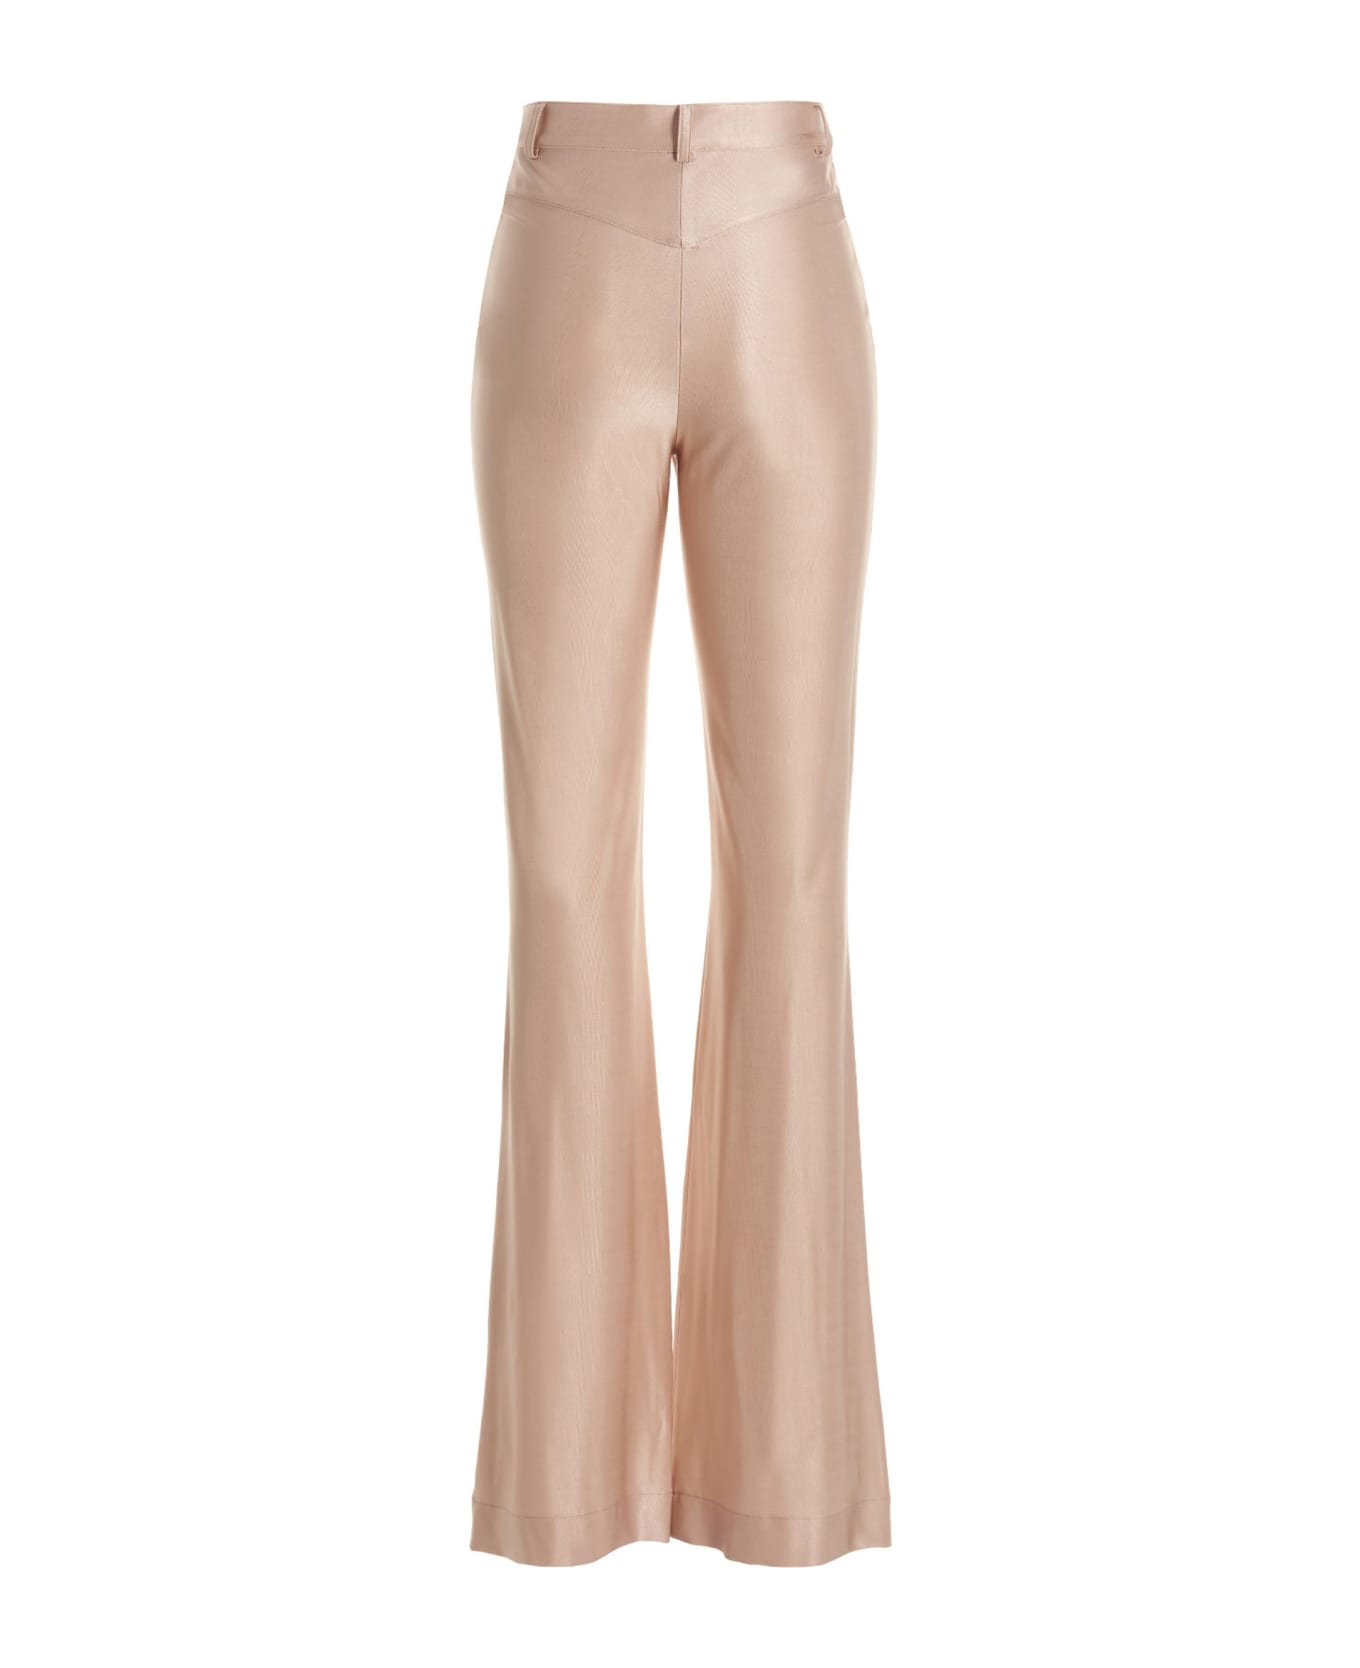 Alexandre Vauthier Shiny Stretch Pants - Pink ボトムス